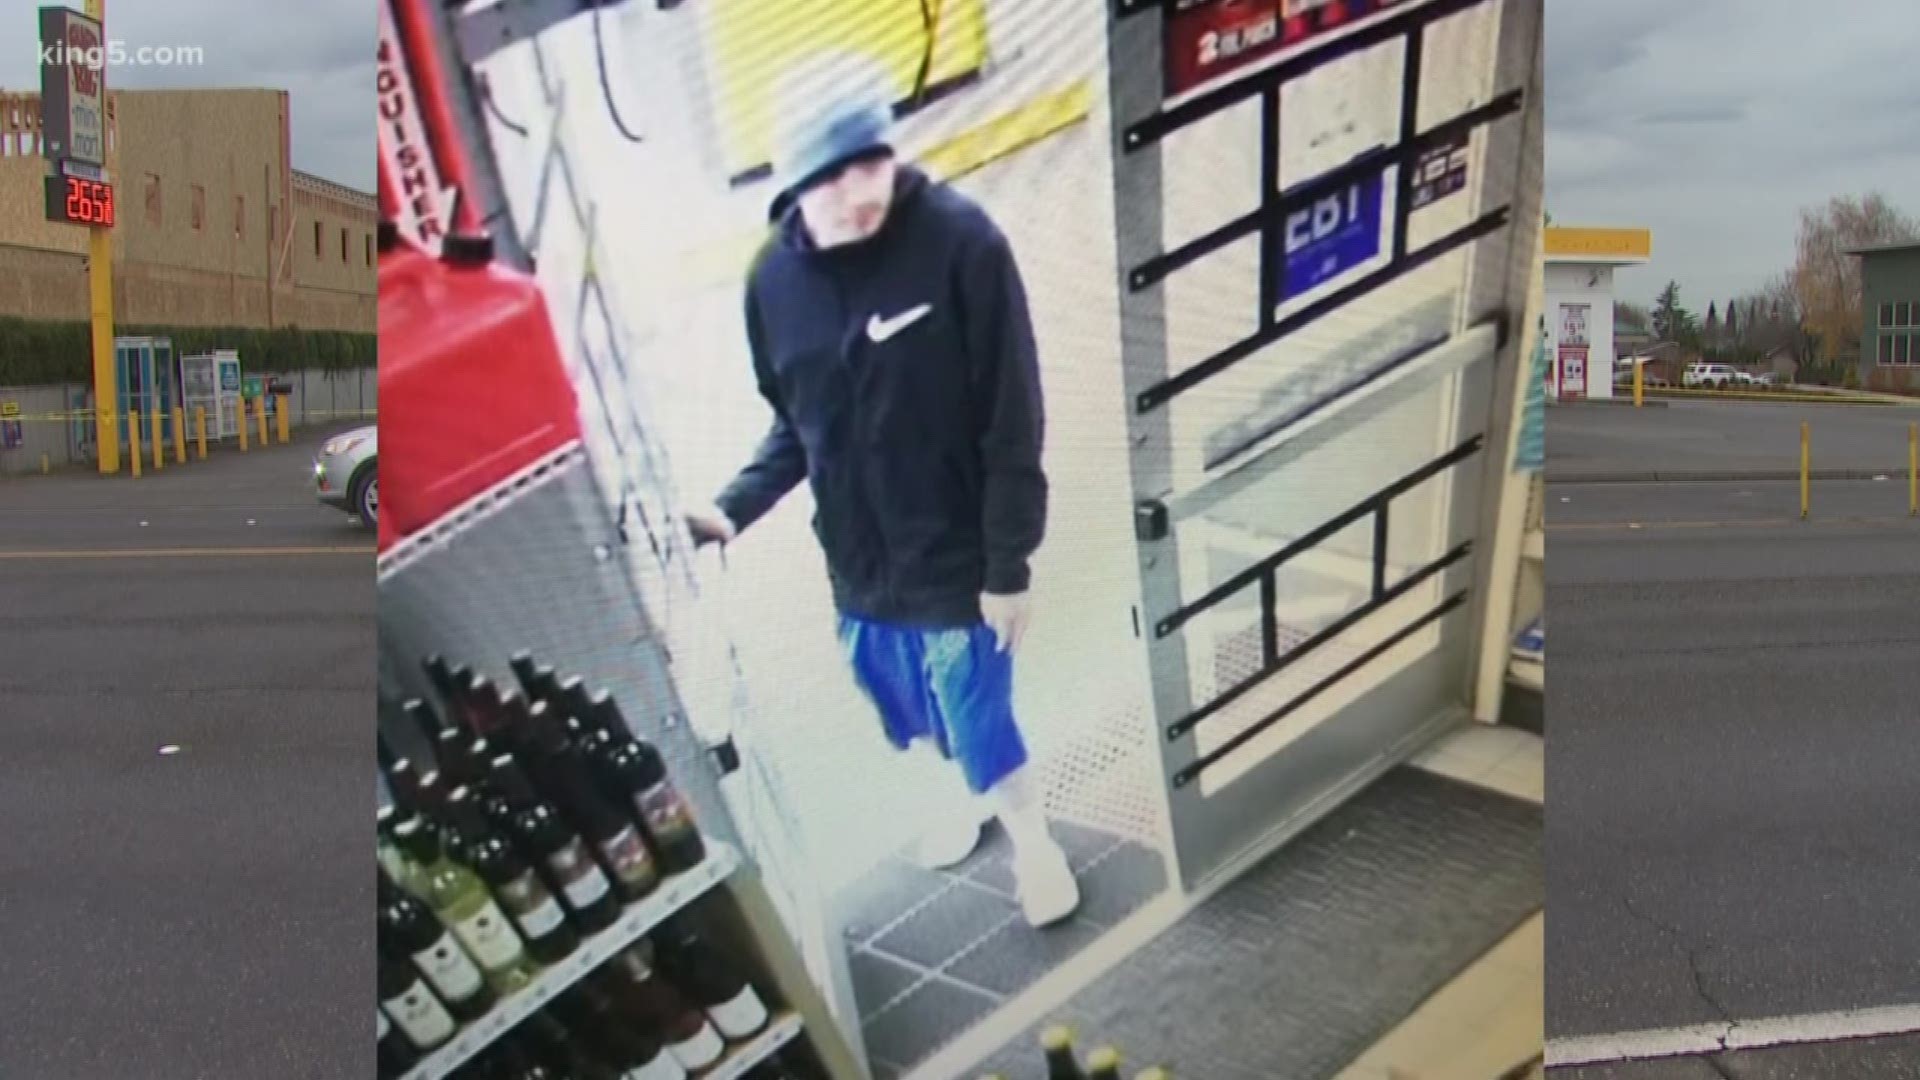 Burlington police released photos of the suspect they're looking for who they say is connected to the shooting death of a 23-year-old man outside of a mini-mart.